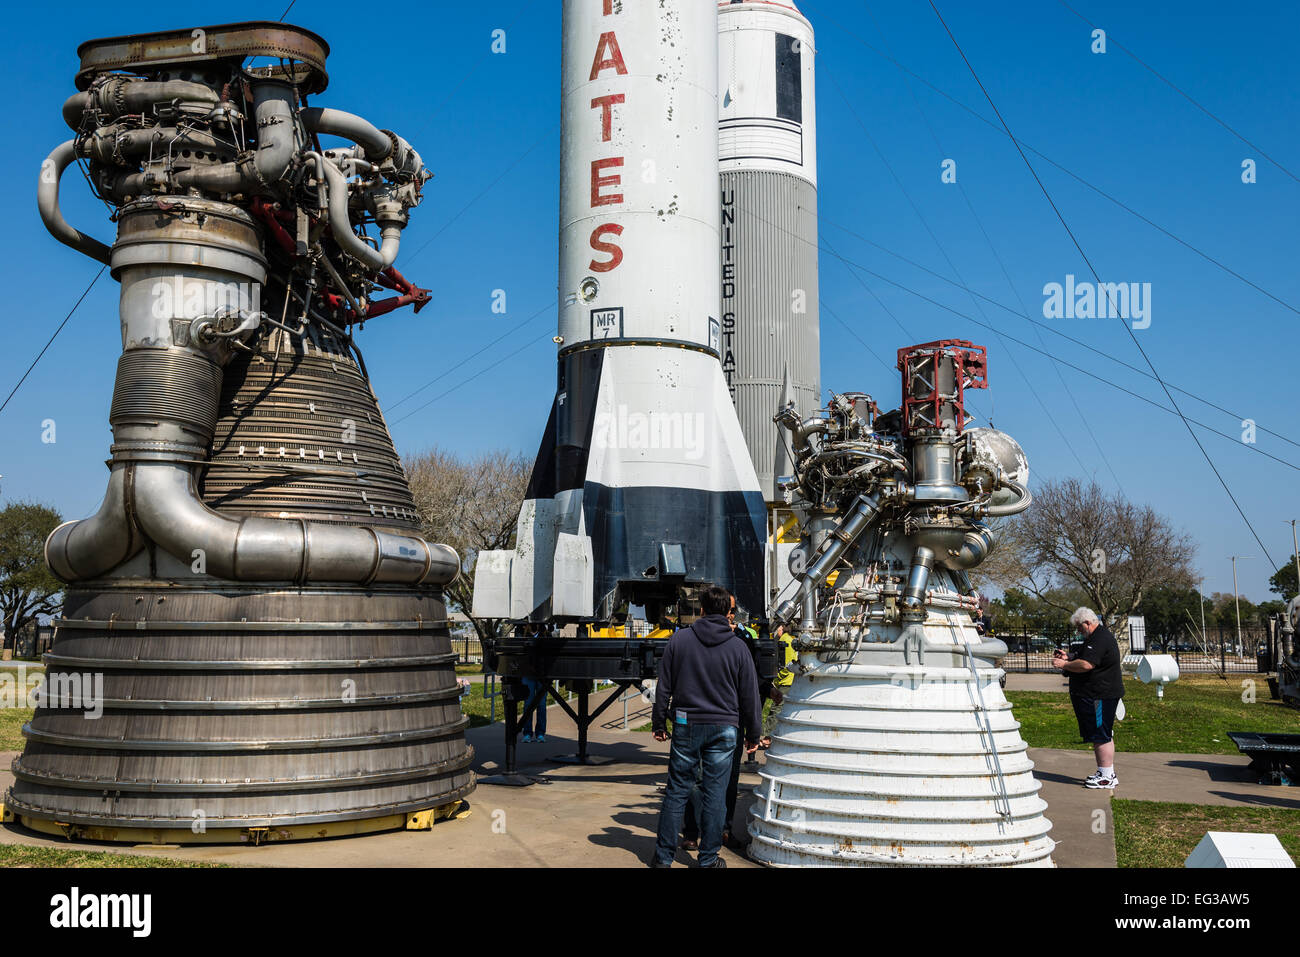 Visitors can get close to the rockets engines at the Rocket Park, NASA Johnson Space Center, Houston, Texas, USA. Stock Photo